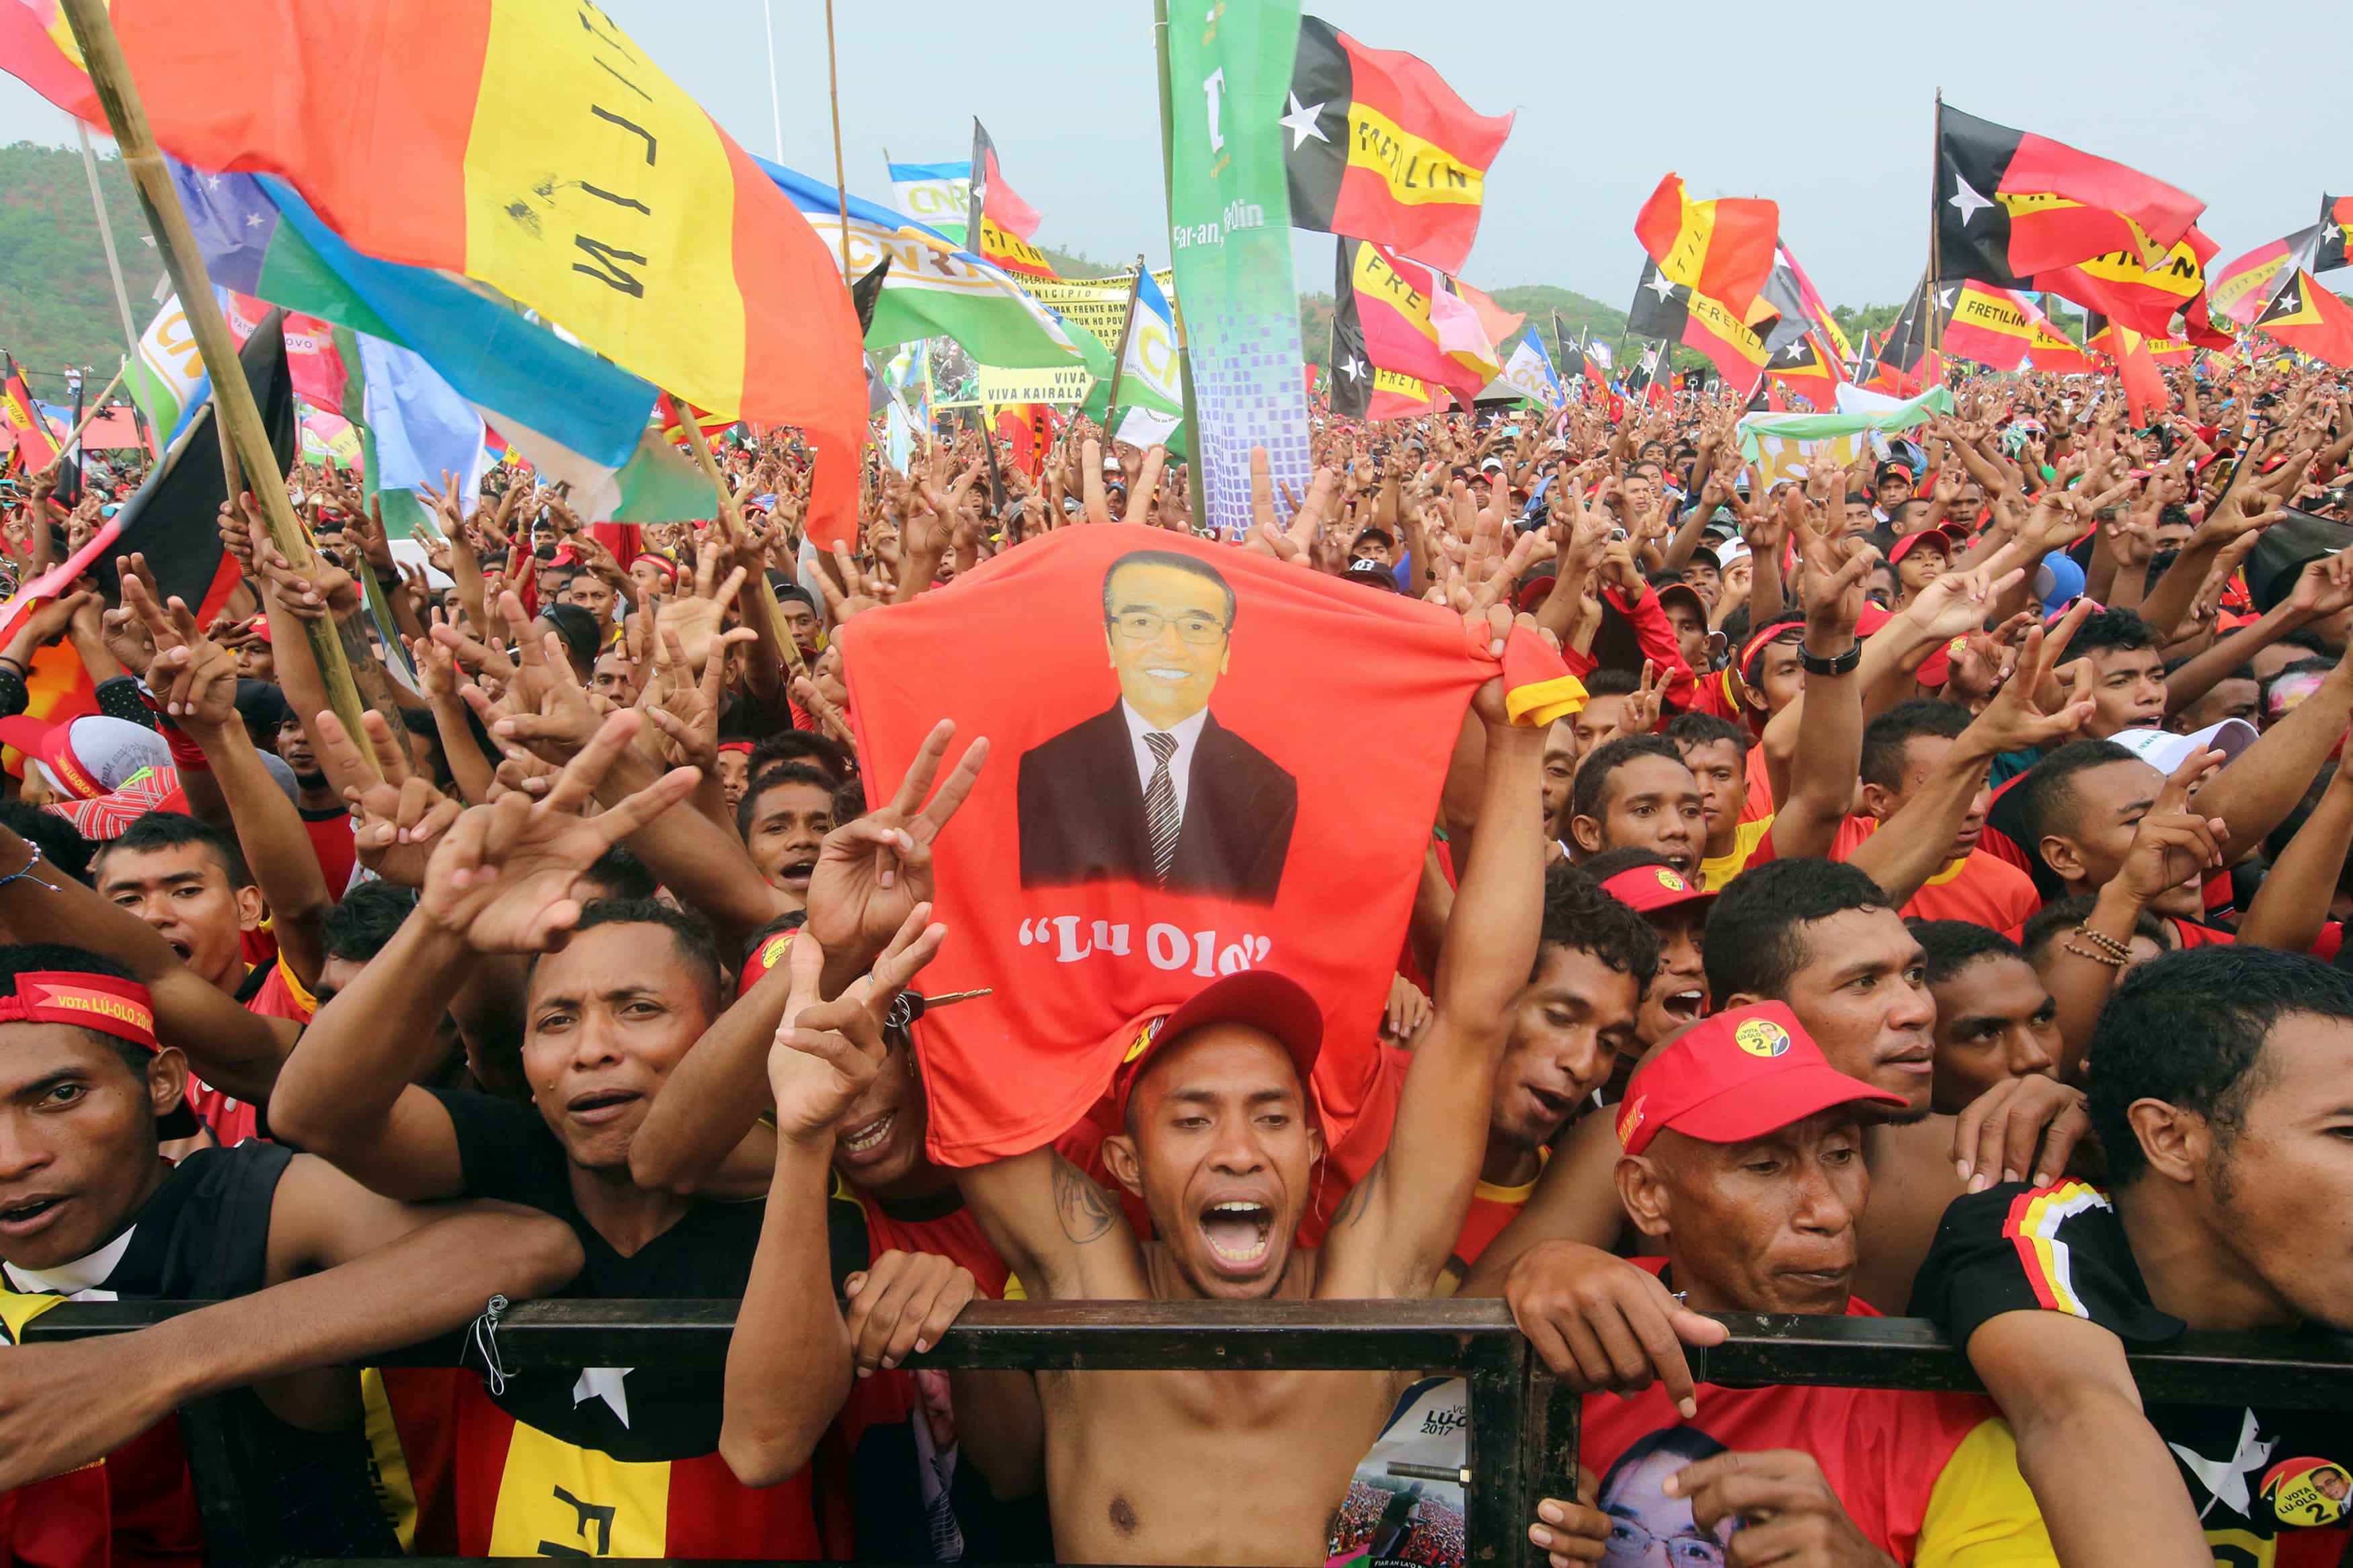 Supporters of presidential candidate Francisco Guterres of the Revolutionary Front for an Independent East Timor (FRETILIN) party cheer at a campaign rally, in Tasi Tolu, Dili, East Timor, 17 March 2017, REUTERS/Lirio da Fonseca